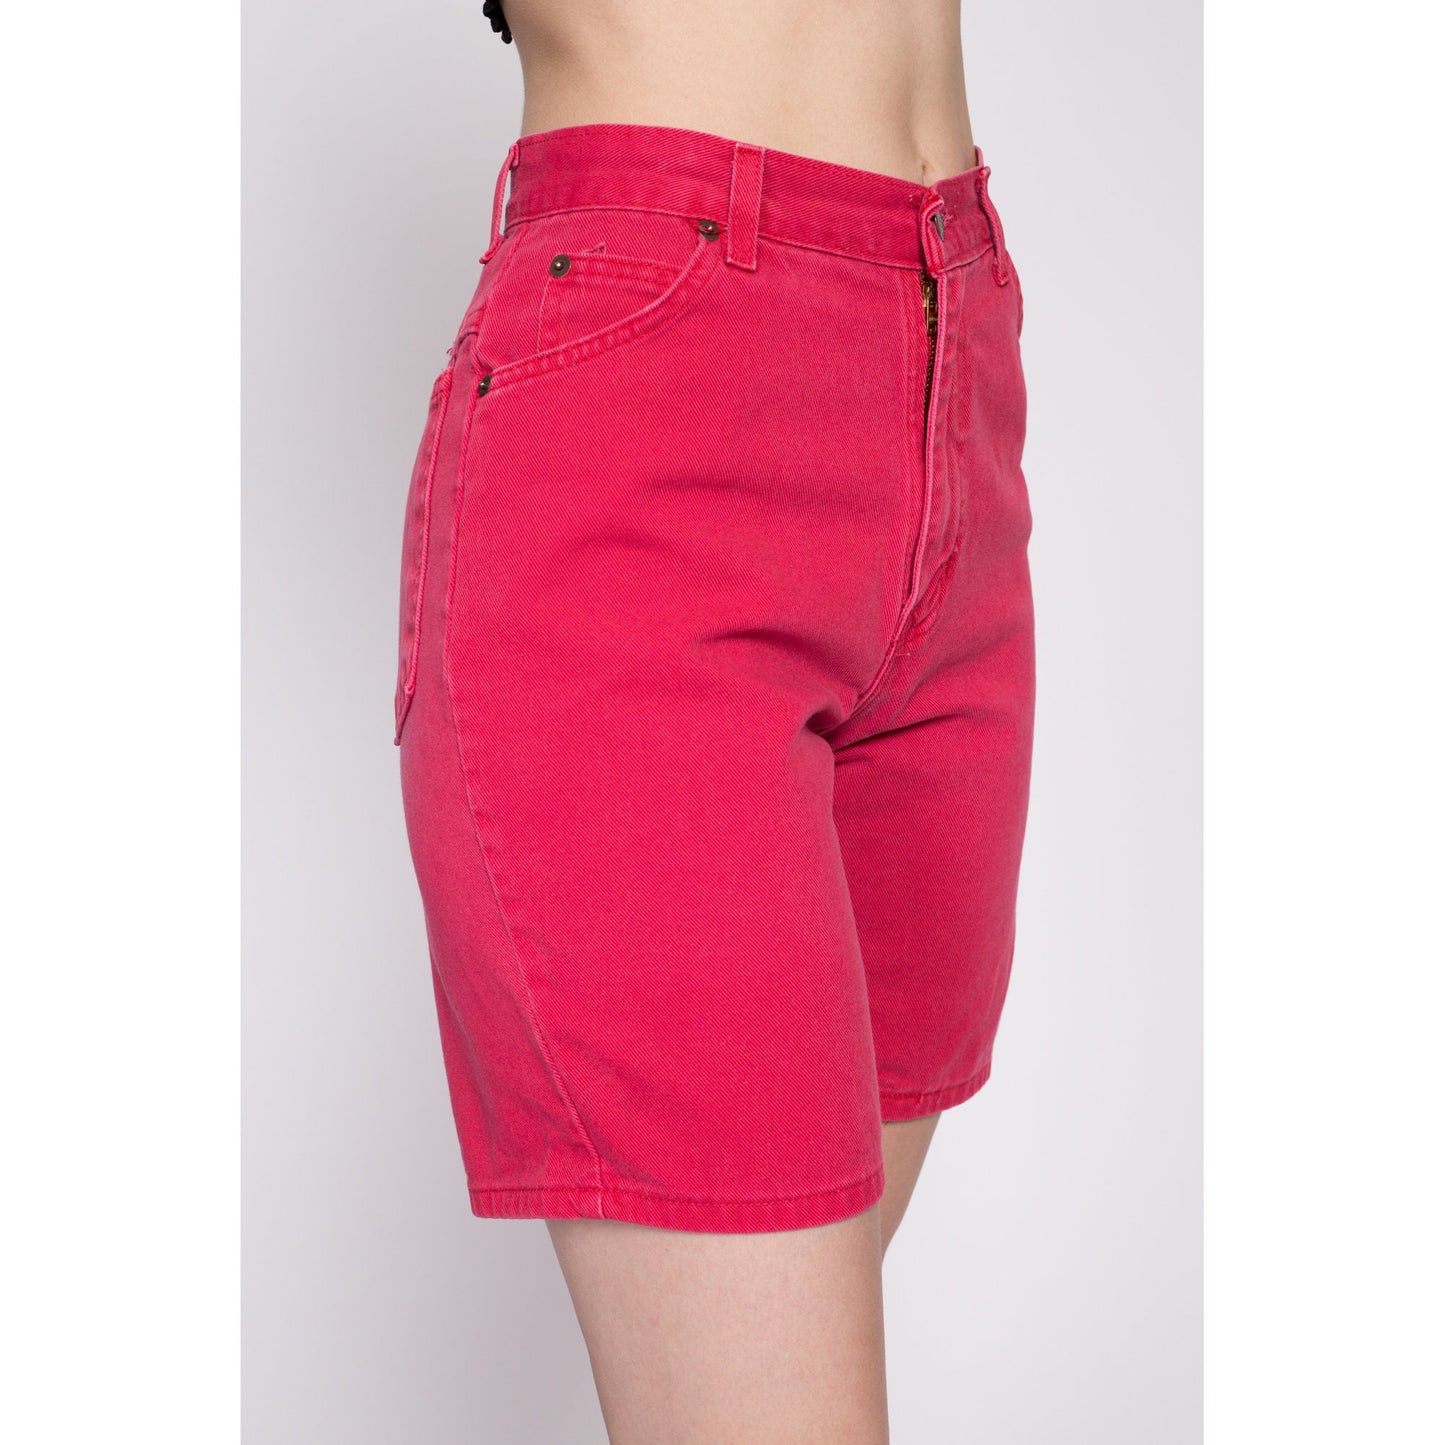 90s Red High Waisted Jean Shorts - Extra Small, 25" | Vintage Denim High Rise Bermuda Mom Shorts